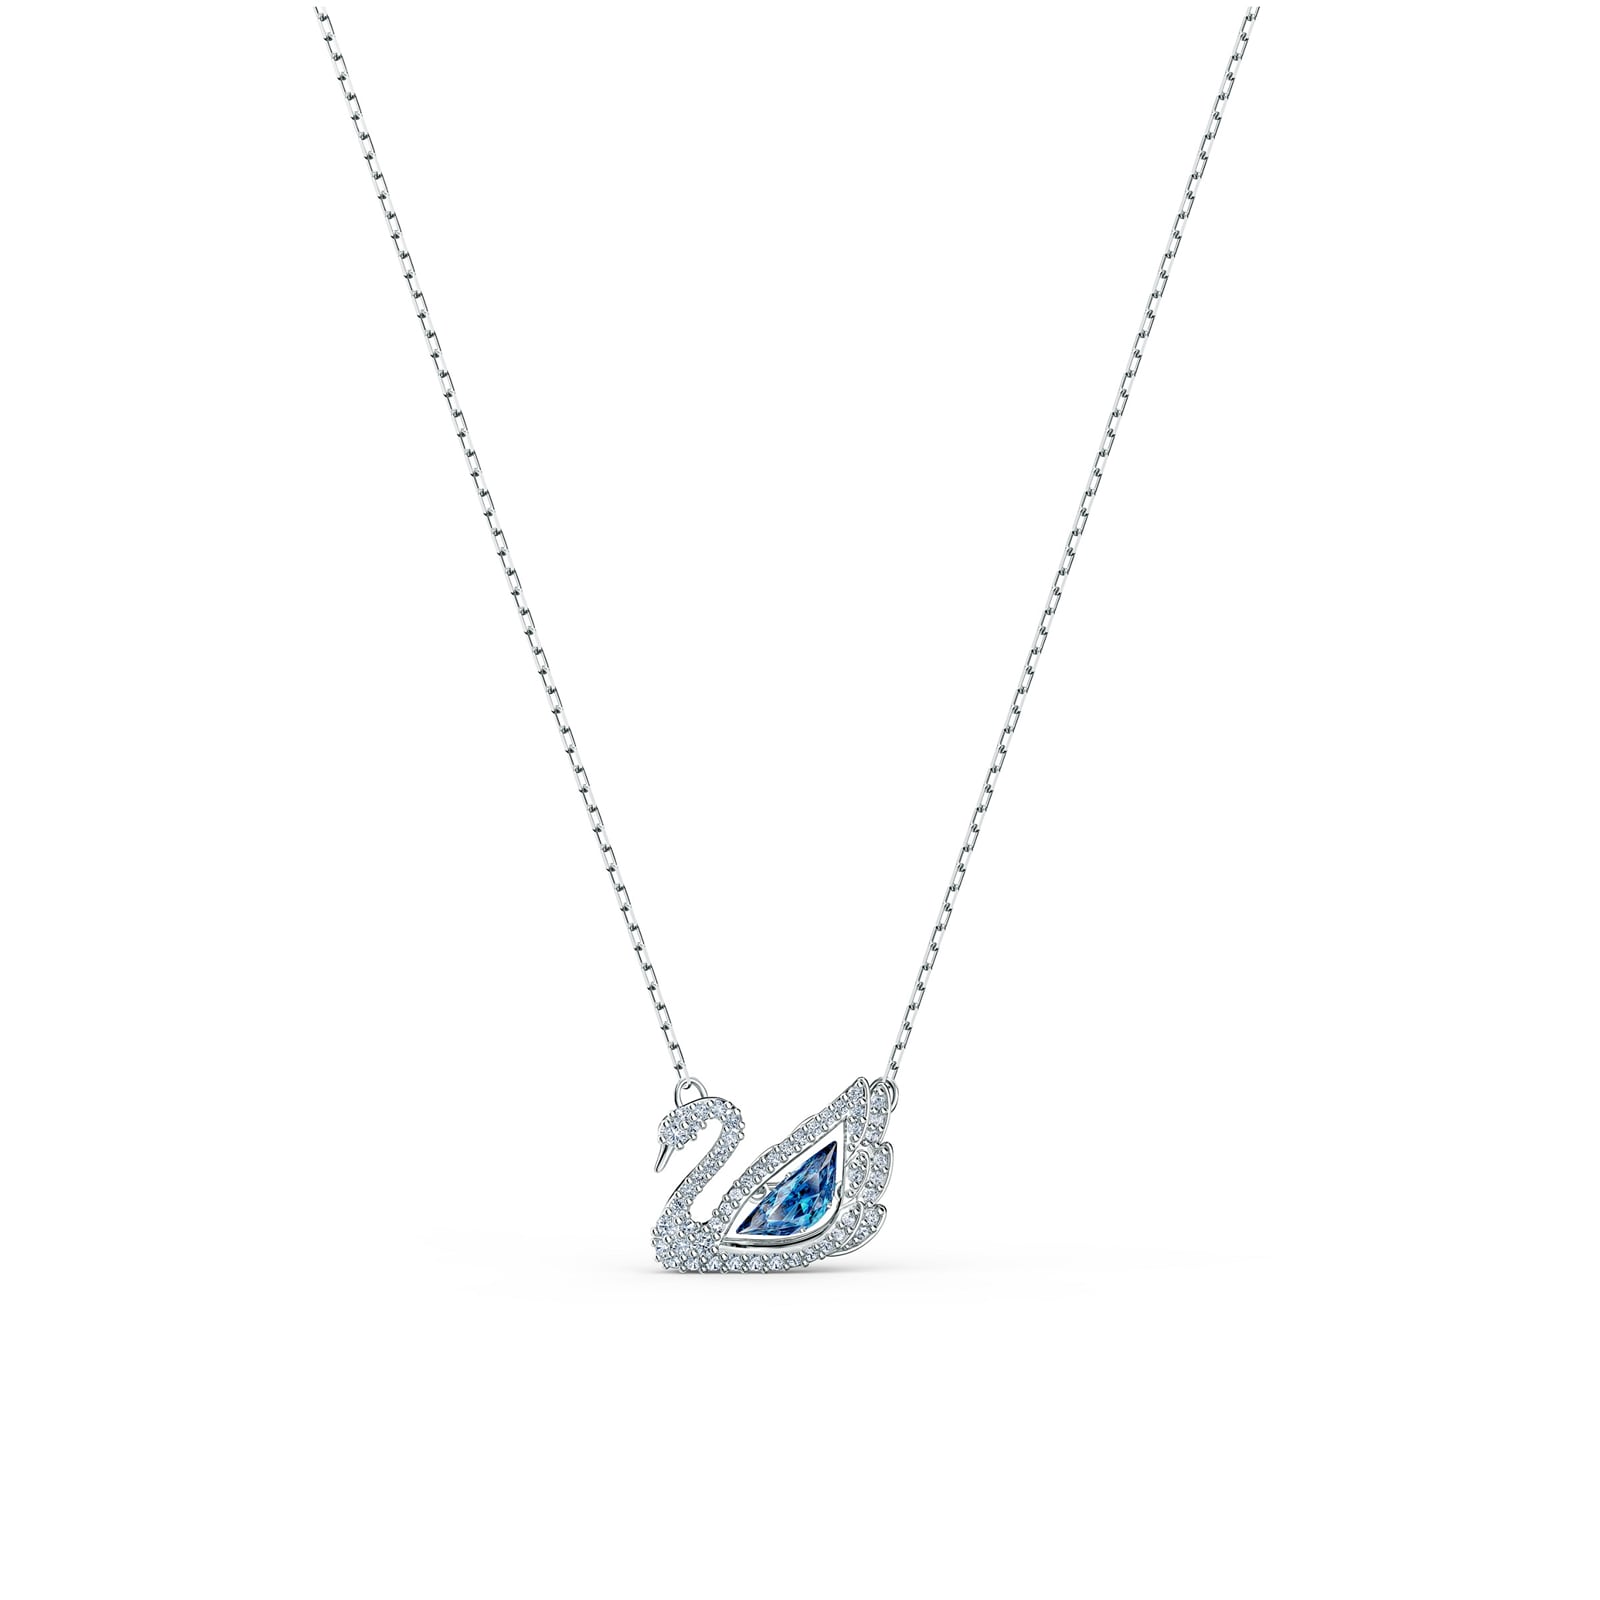 Dancing Swan Blue Rhodium Plated Necklace